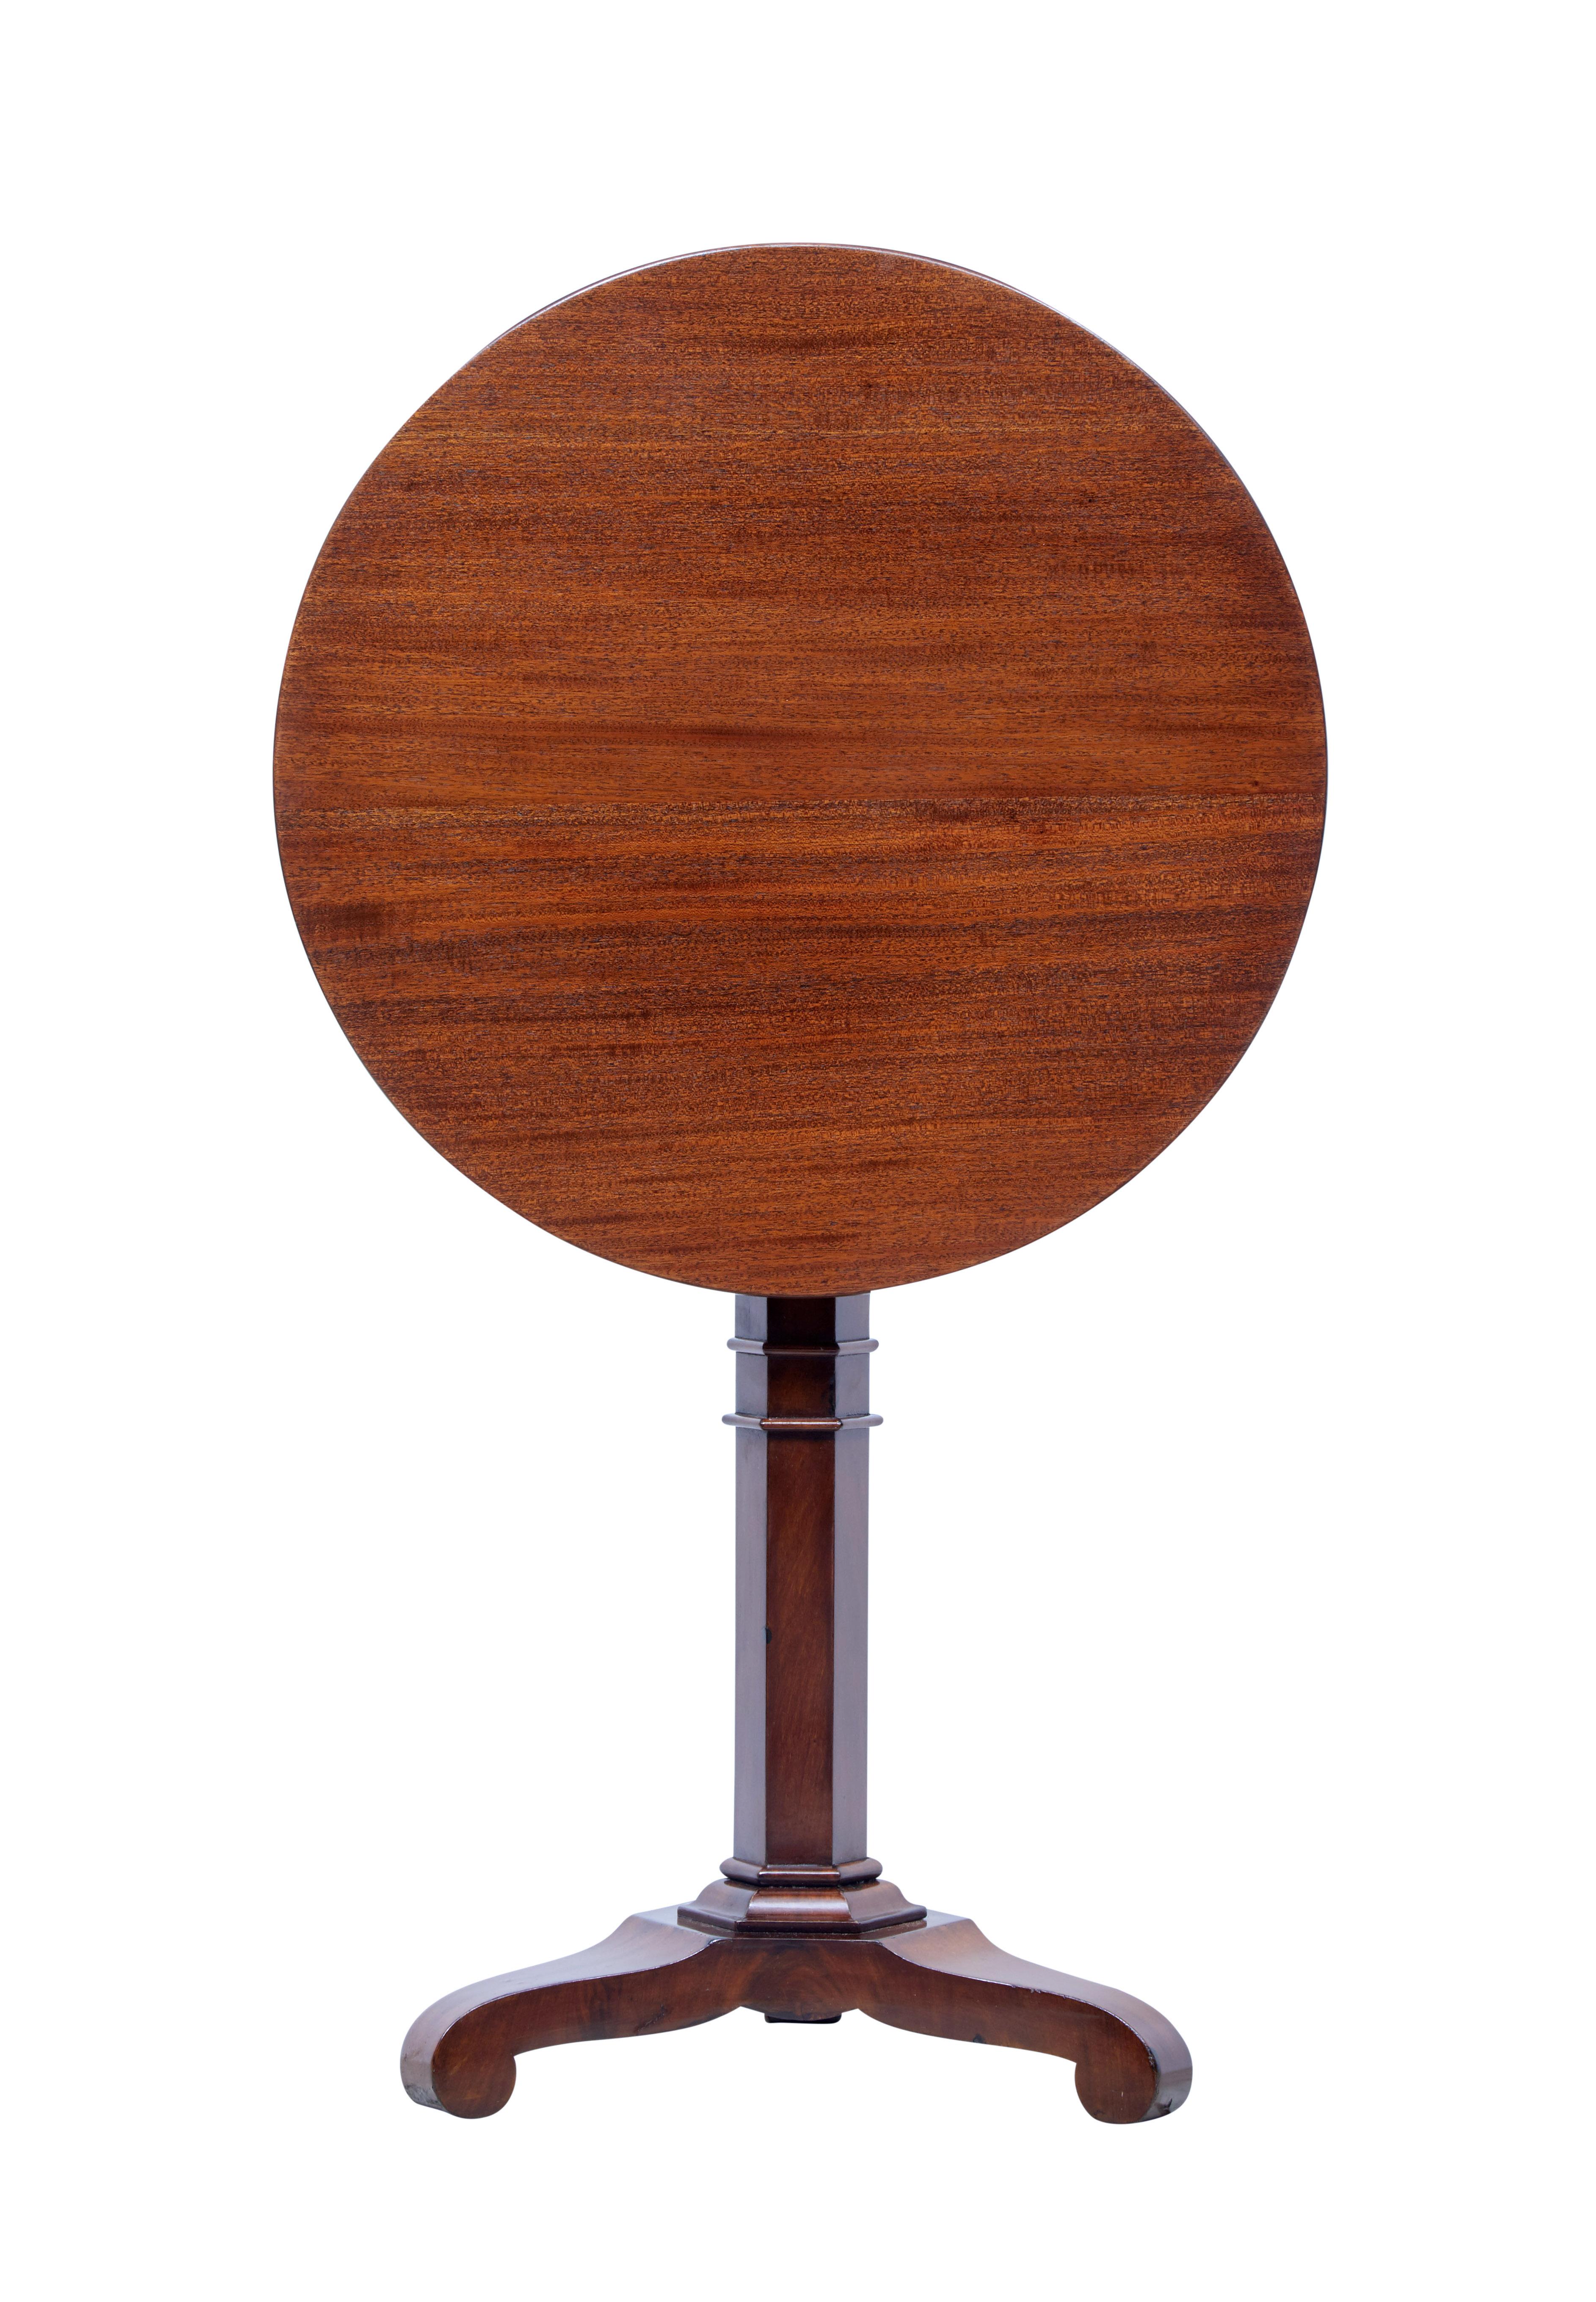 Elegant round Danish mahogany occasional table, circa 1850.

Re-polished circular top, tilting top which is secured by peg. Supported by hexagonal stem and standing on triform base with scrolled feet.

Minor surface marks.